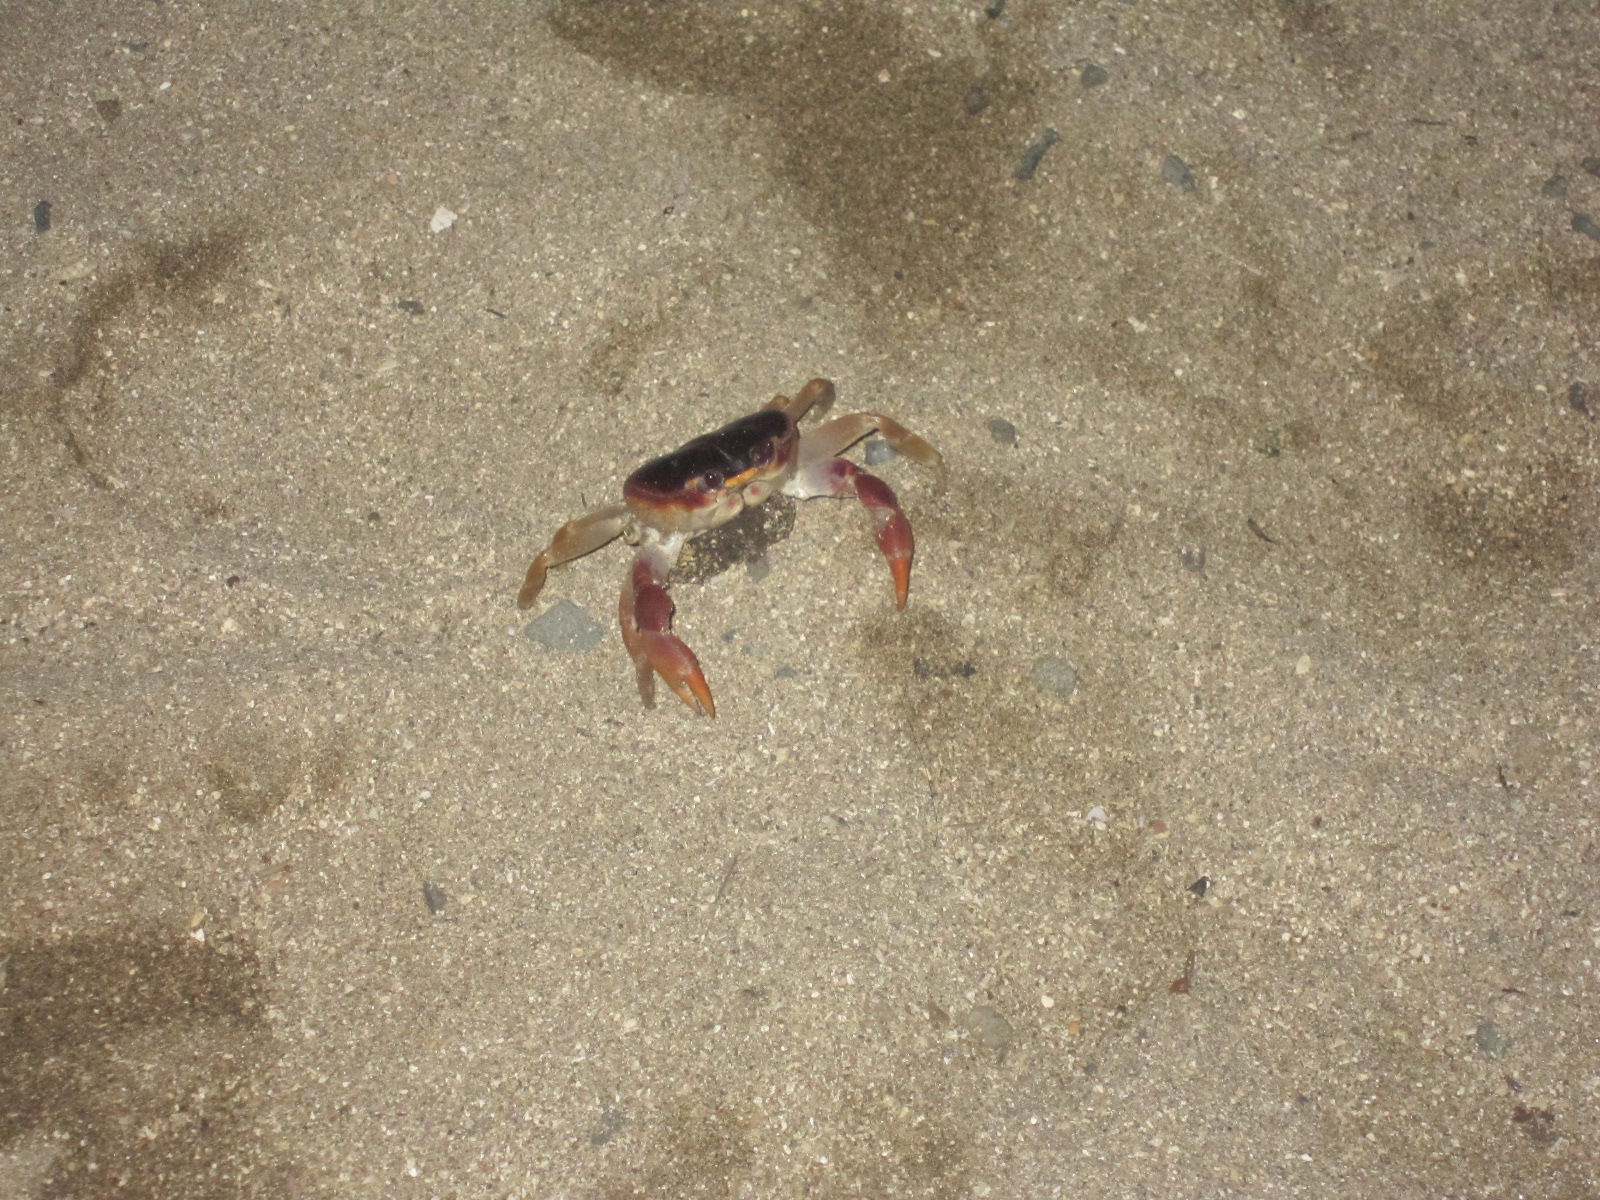 there is a crab in the sand and a fish